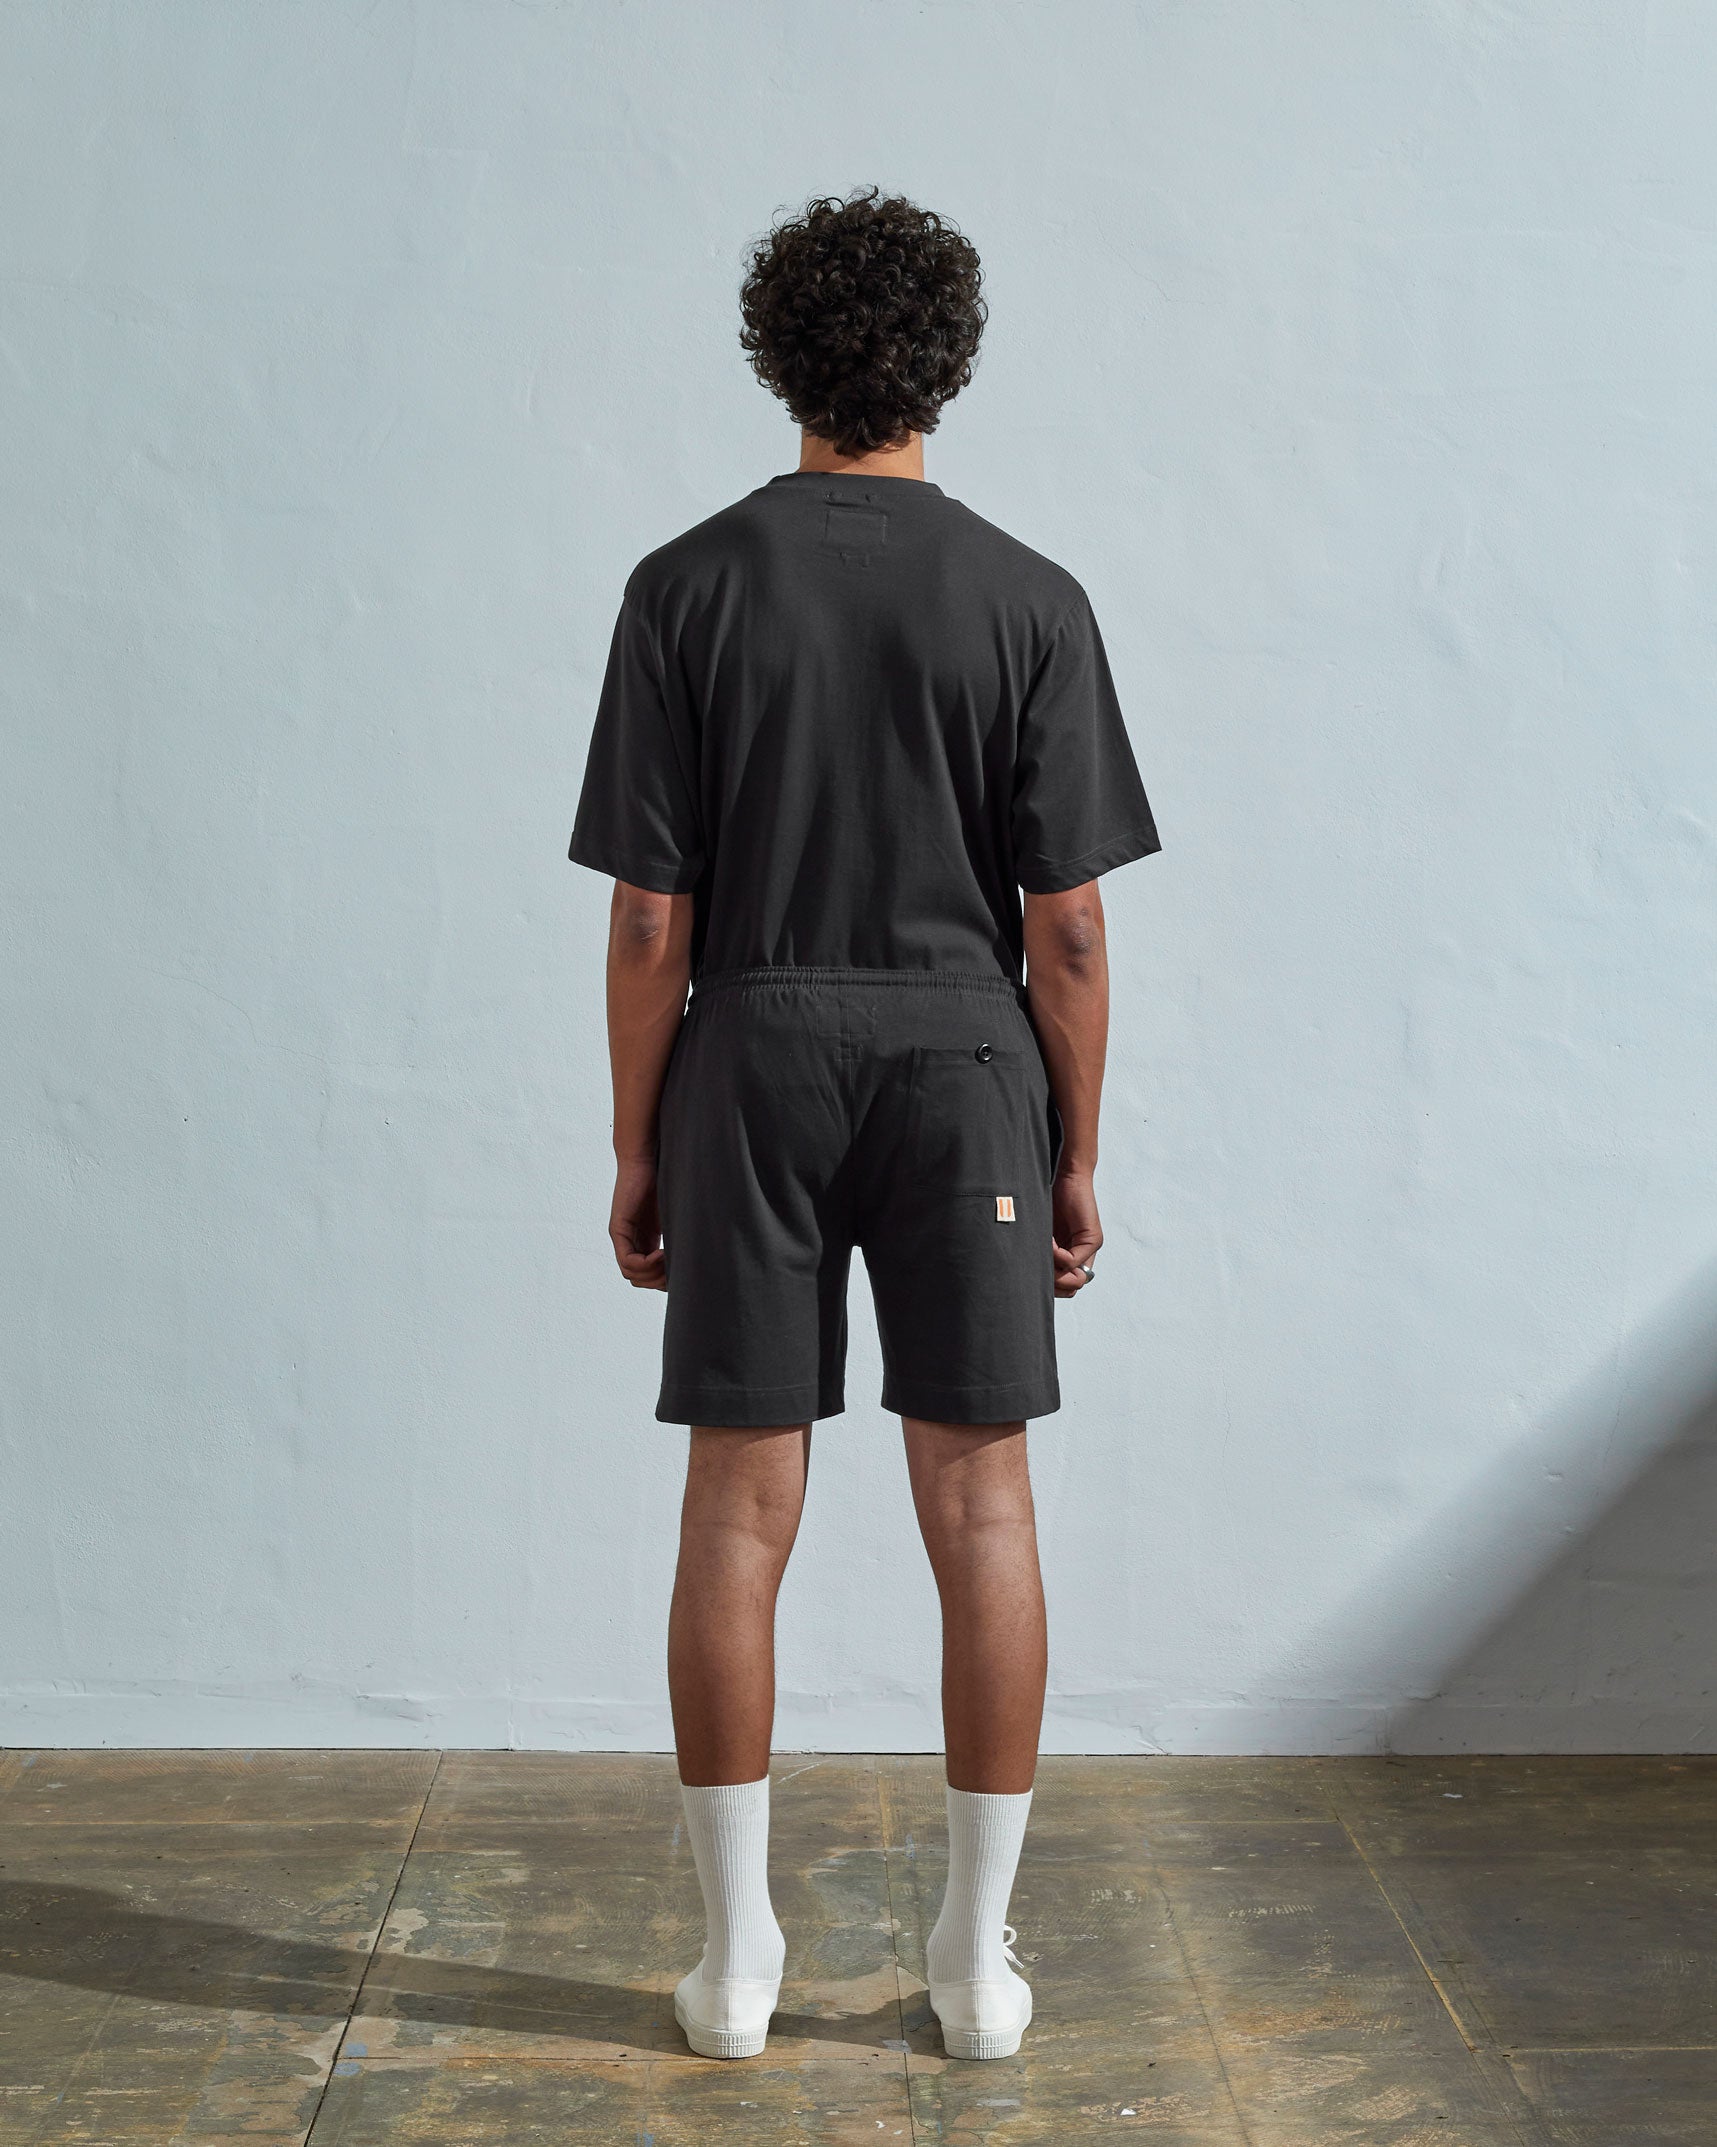 Back view of model wearing faded black, relaxed cut organic cotton #7007 jersey shorts by Uskees with focus on back pocket with corozo button.